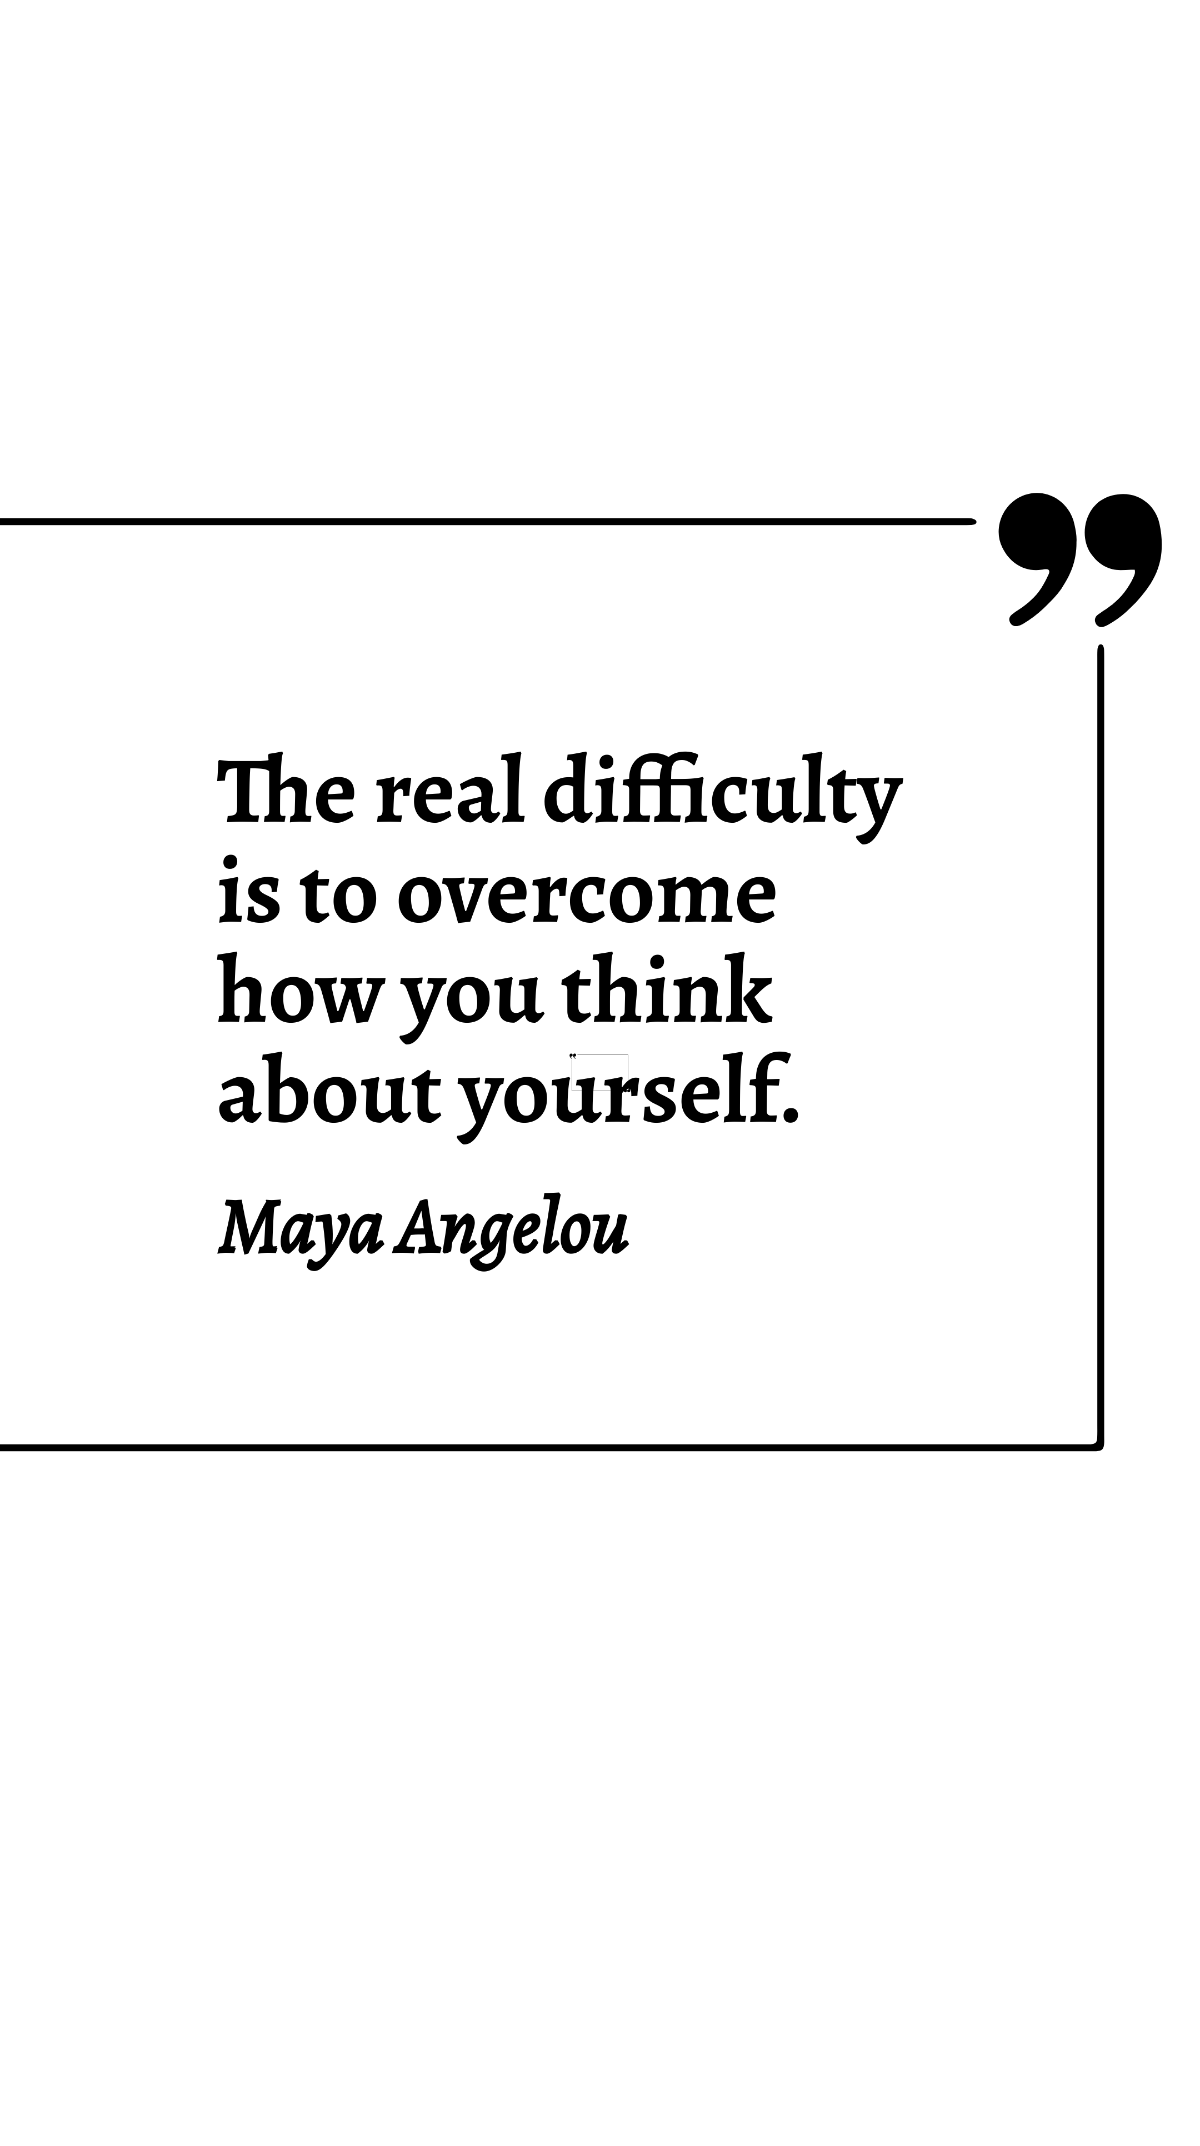 Maya Angelou - The real difficulty is to overcome how you think about yourself. Template